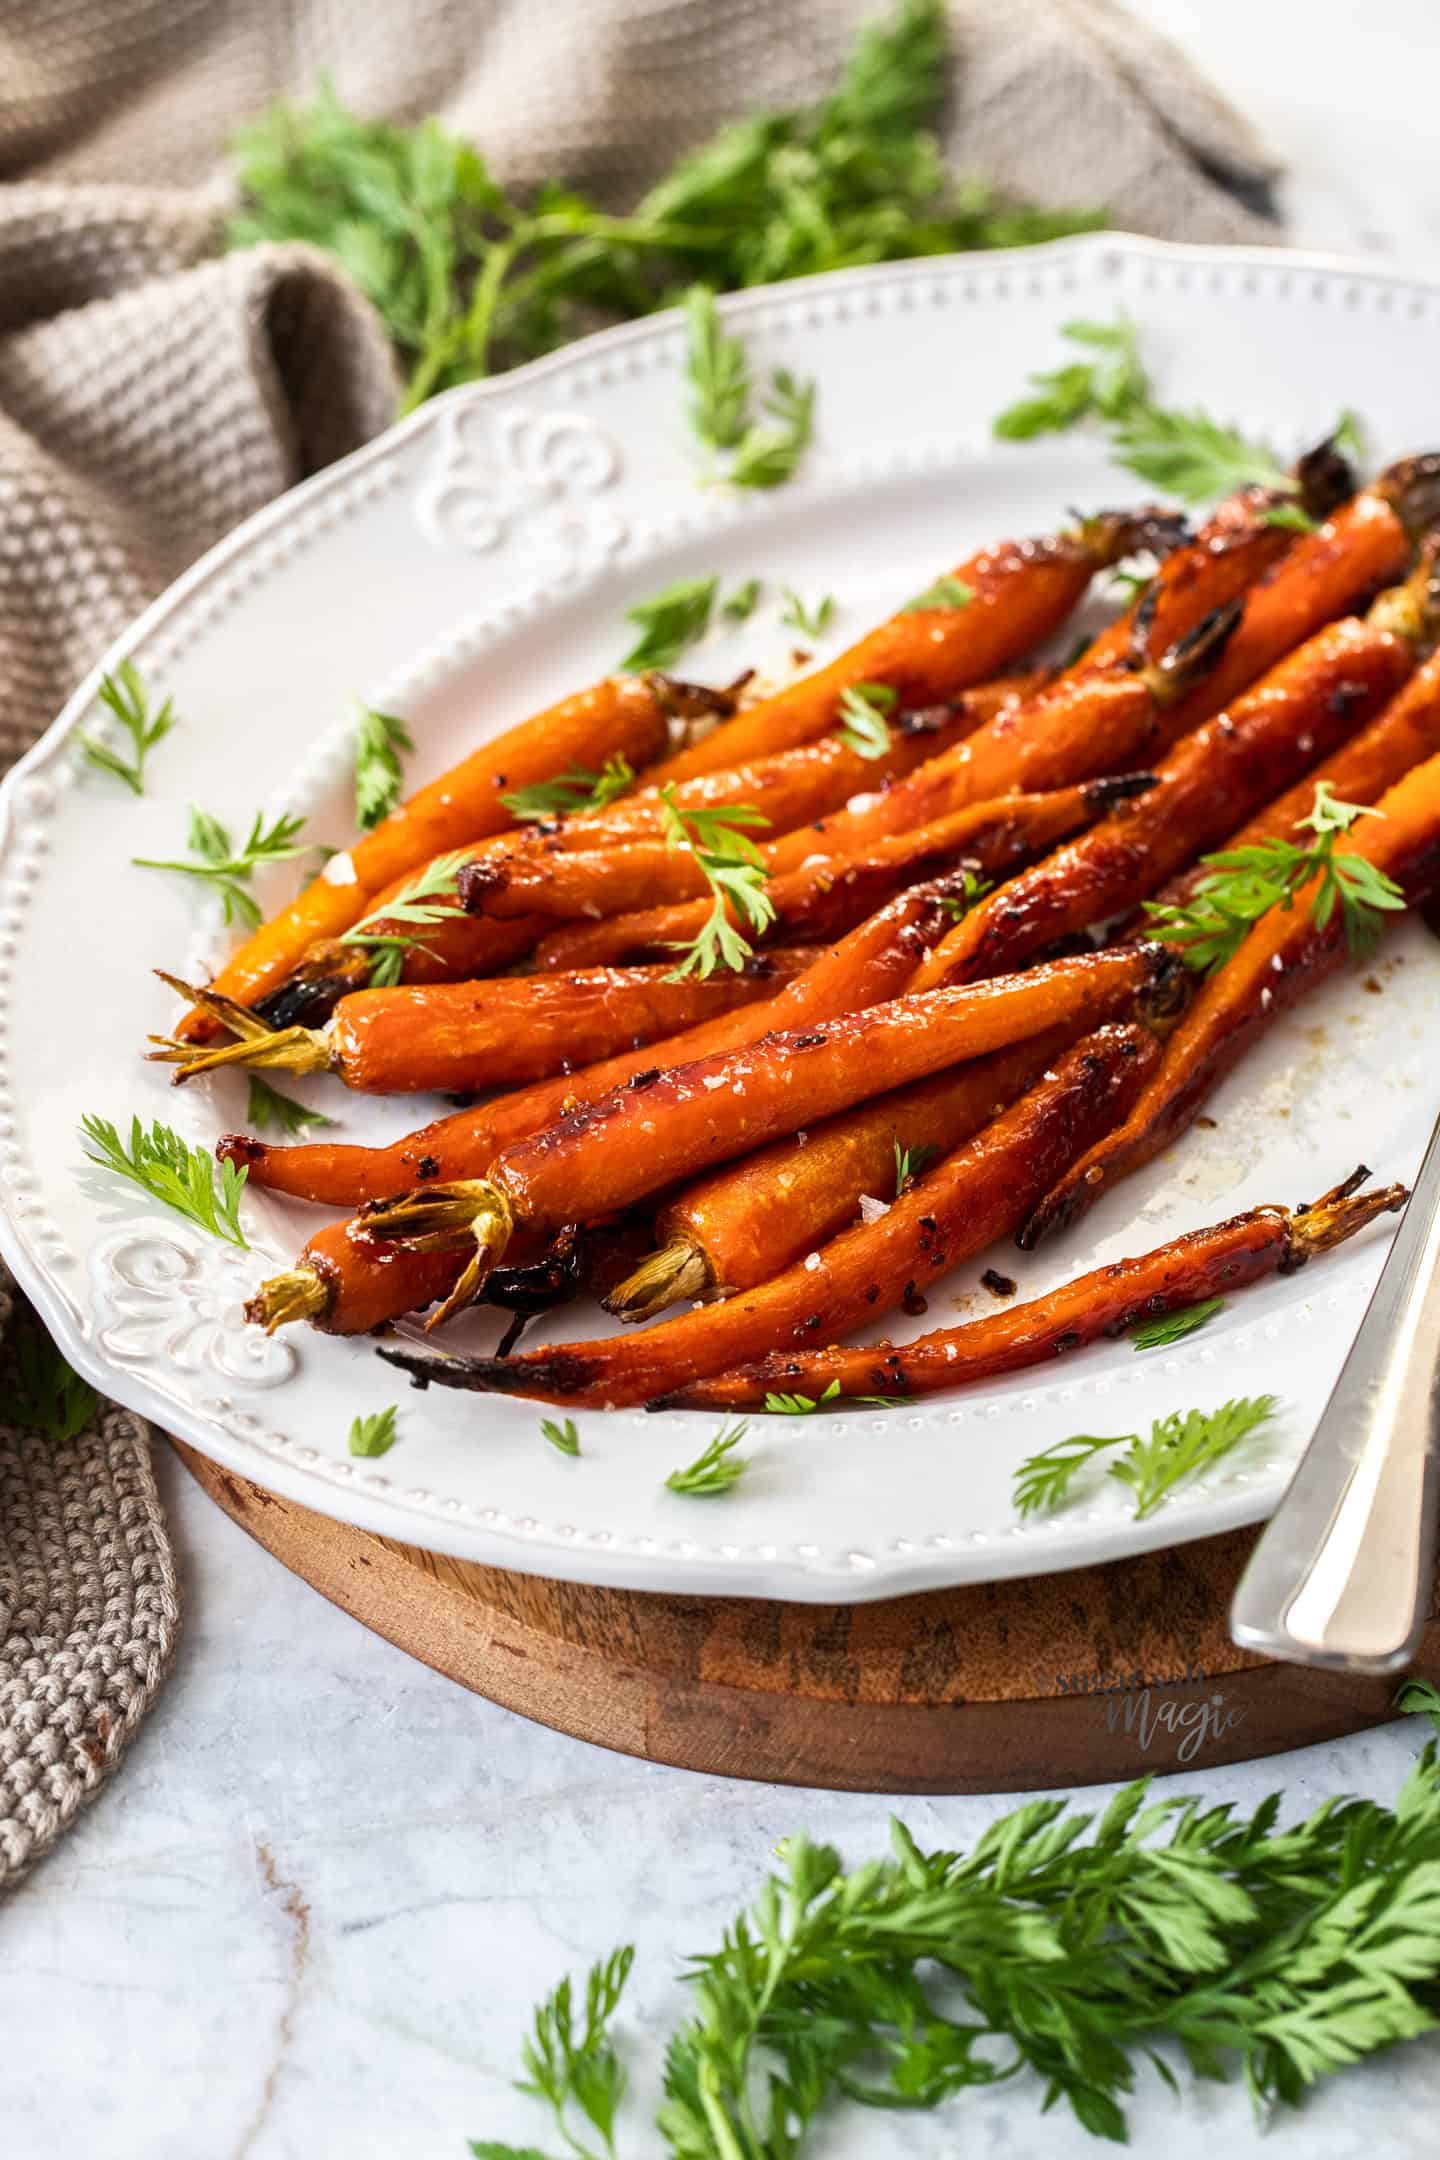 A batch of roasted baby carrots on a white and wooden platter.